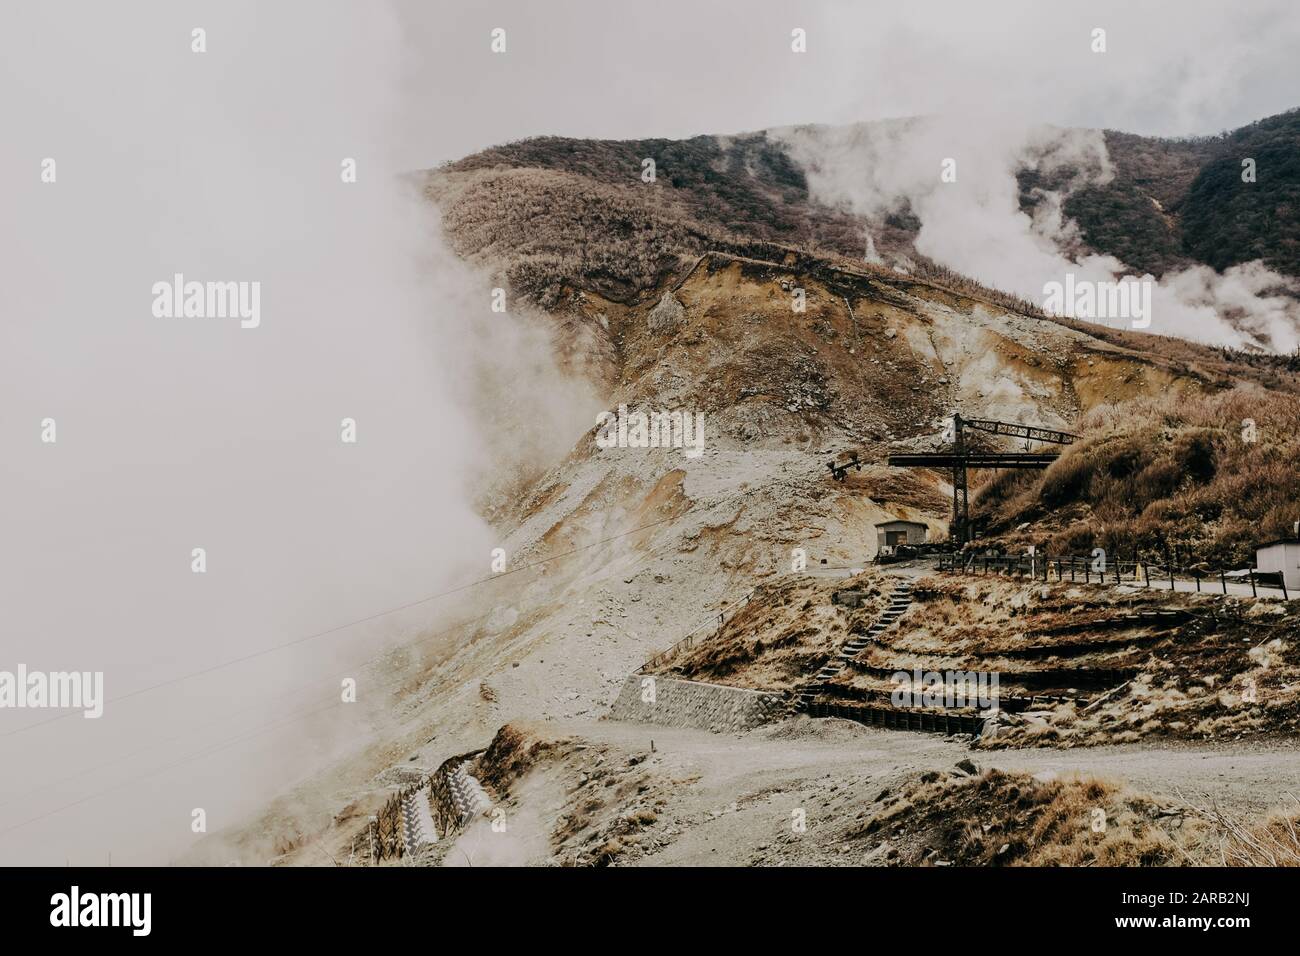 Duotone image of sulfur Mining activity in a mountainside photographed in Japan Stock Photo